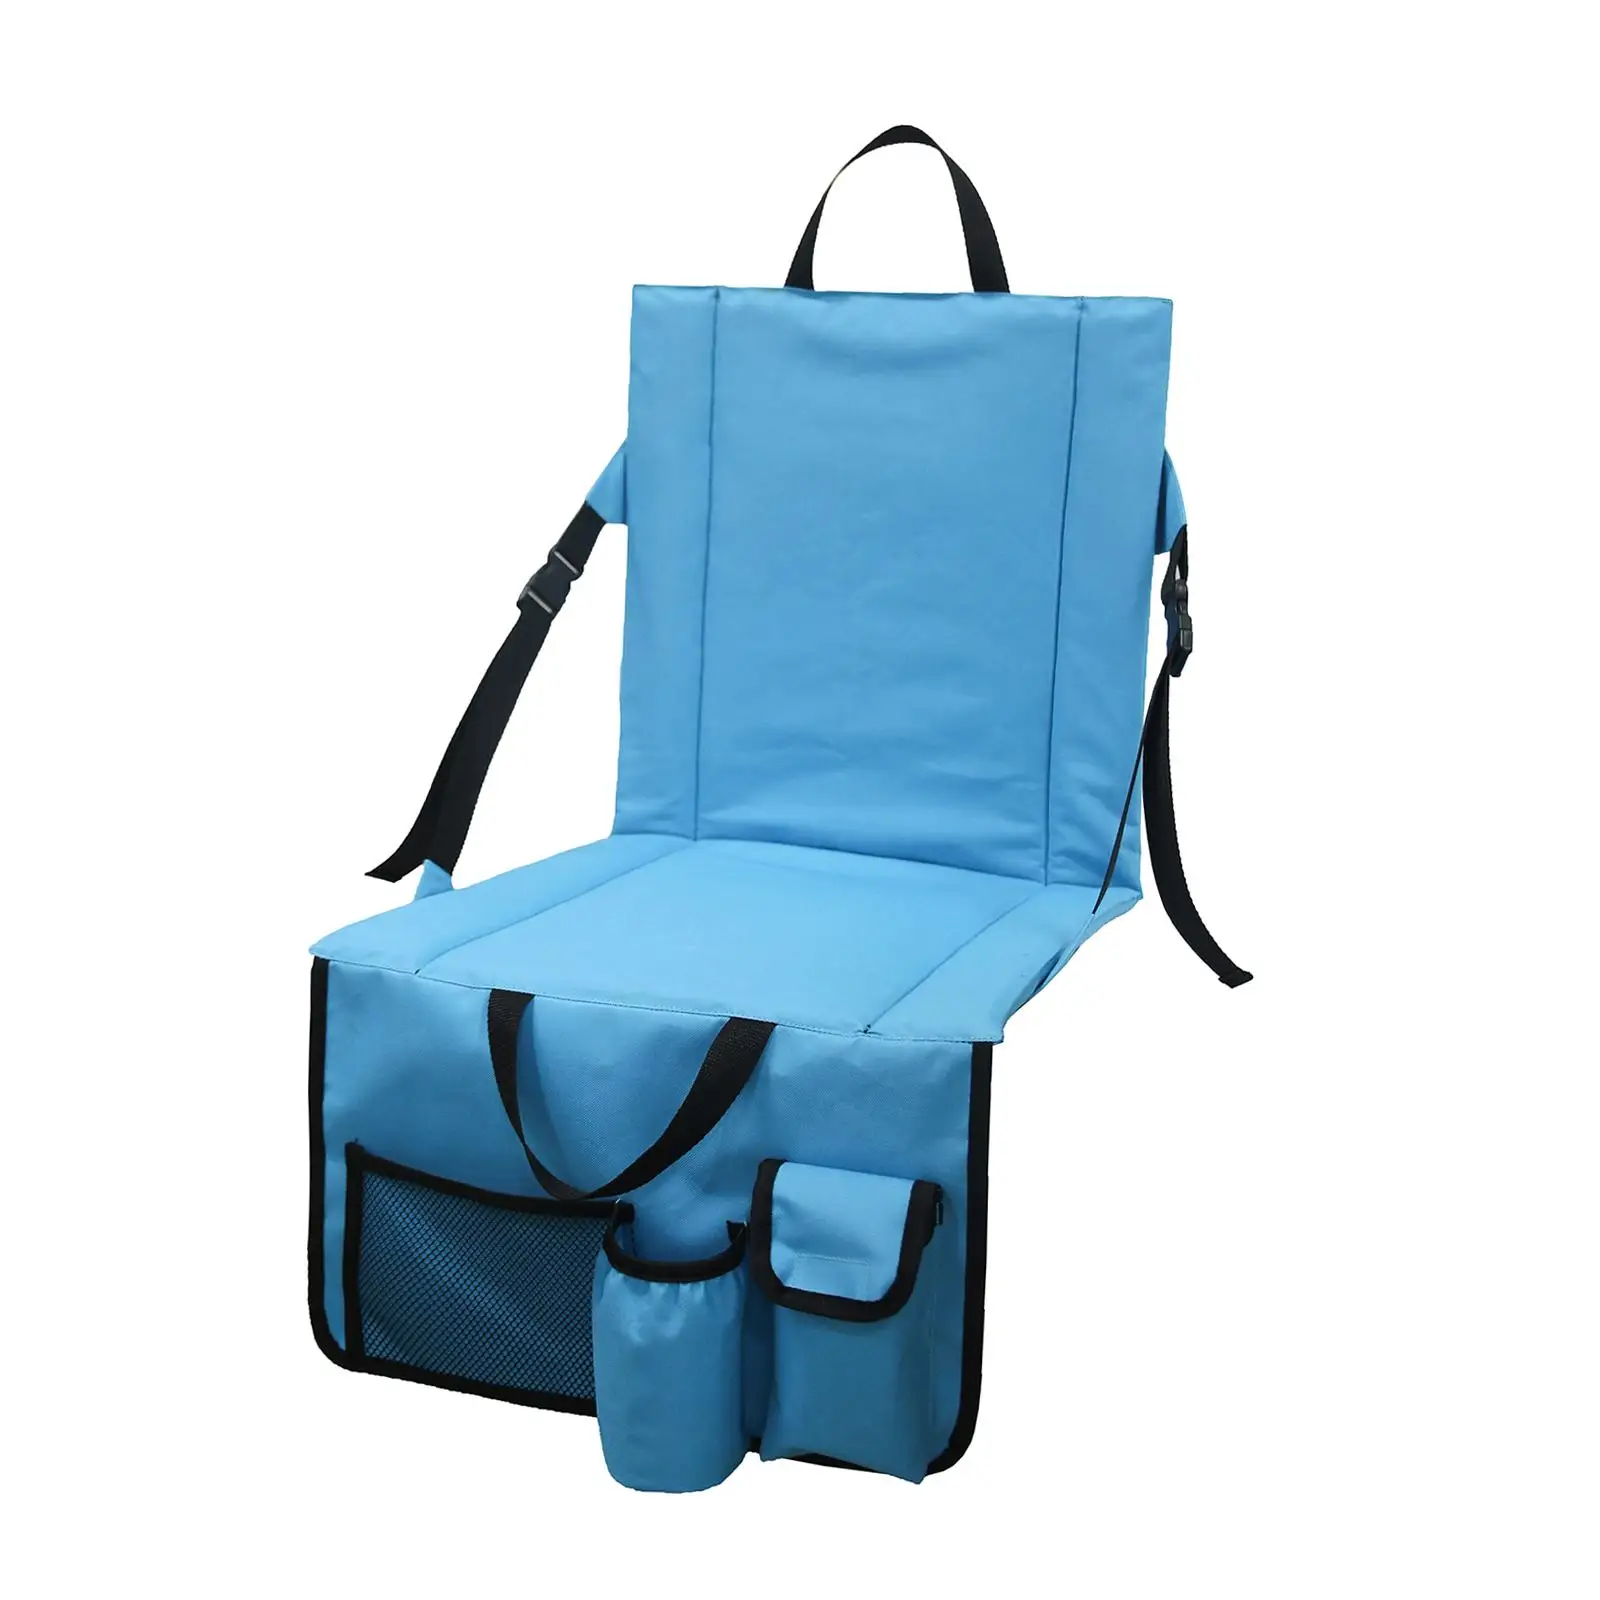 Portable Stadium Chair with Pocket Padded Holder Lightweight Sit Mat Wide Camping Backpacking Picnic Travel